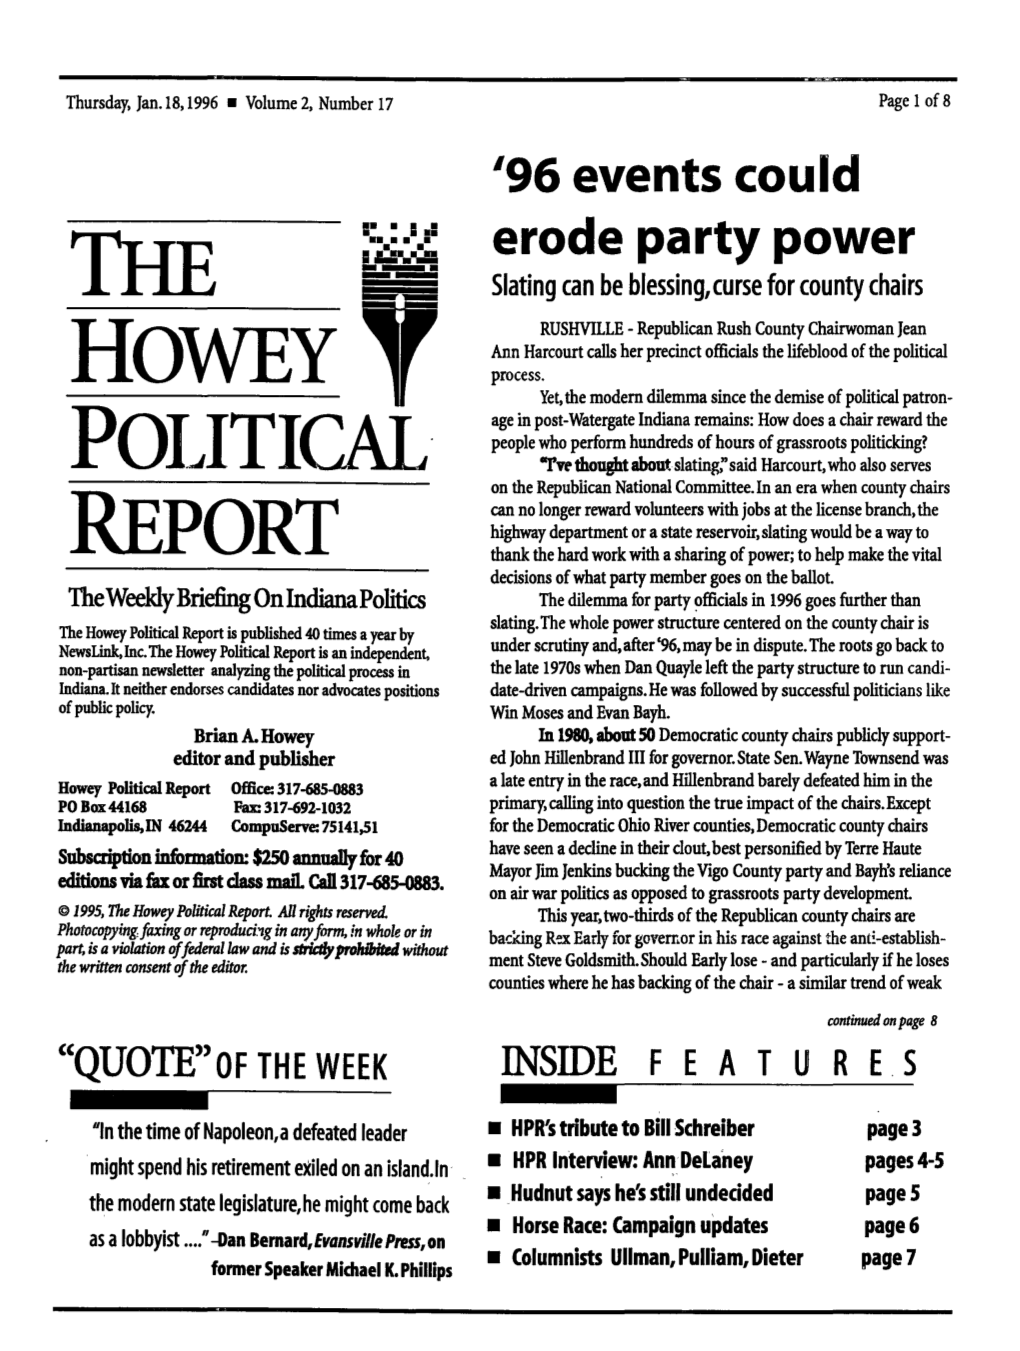 The Howey Political Report Is Published 40 Times a Year by Newslink,Inc